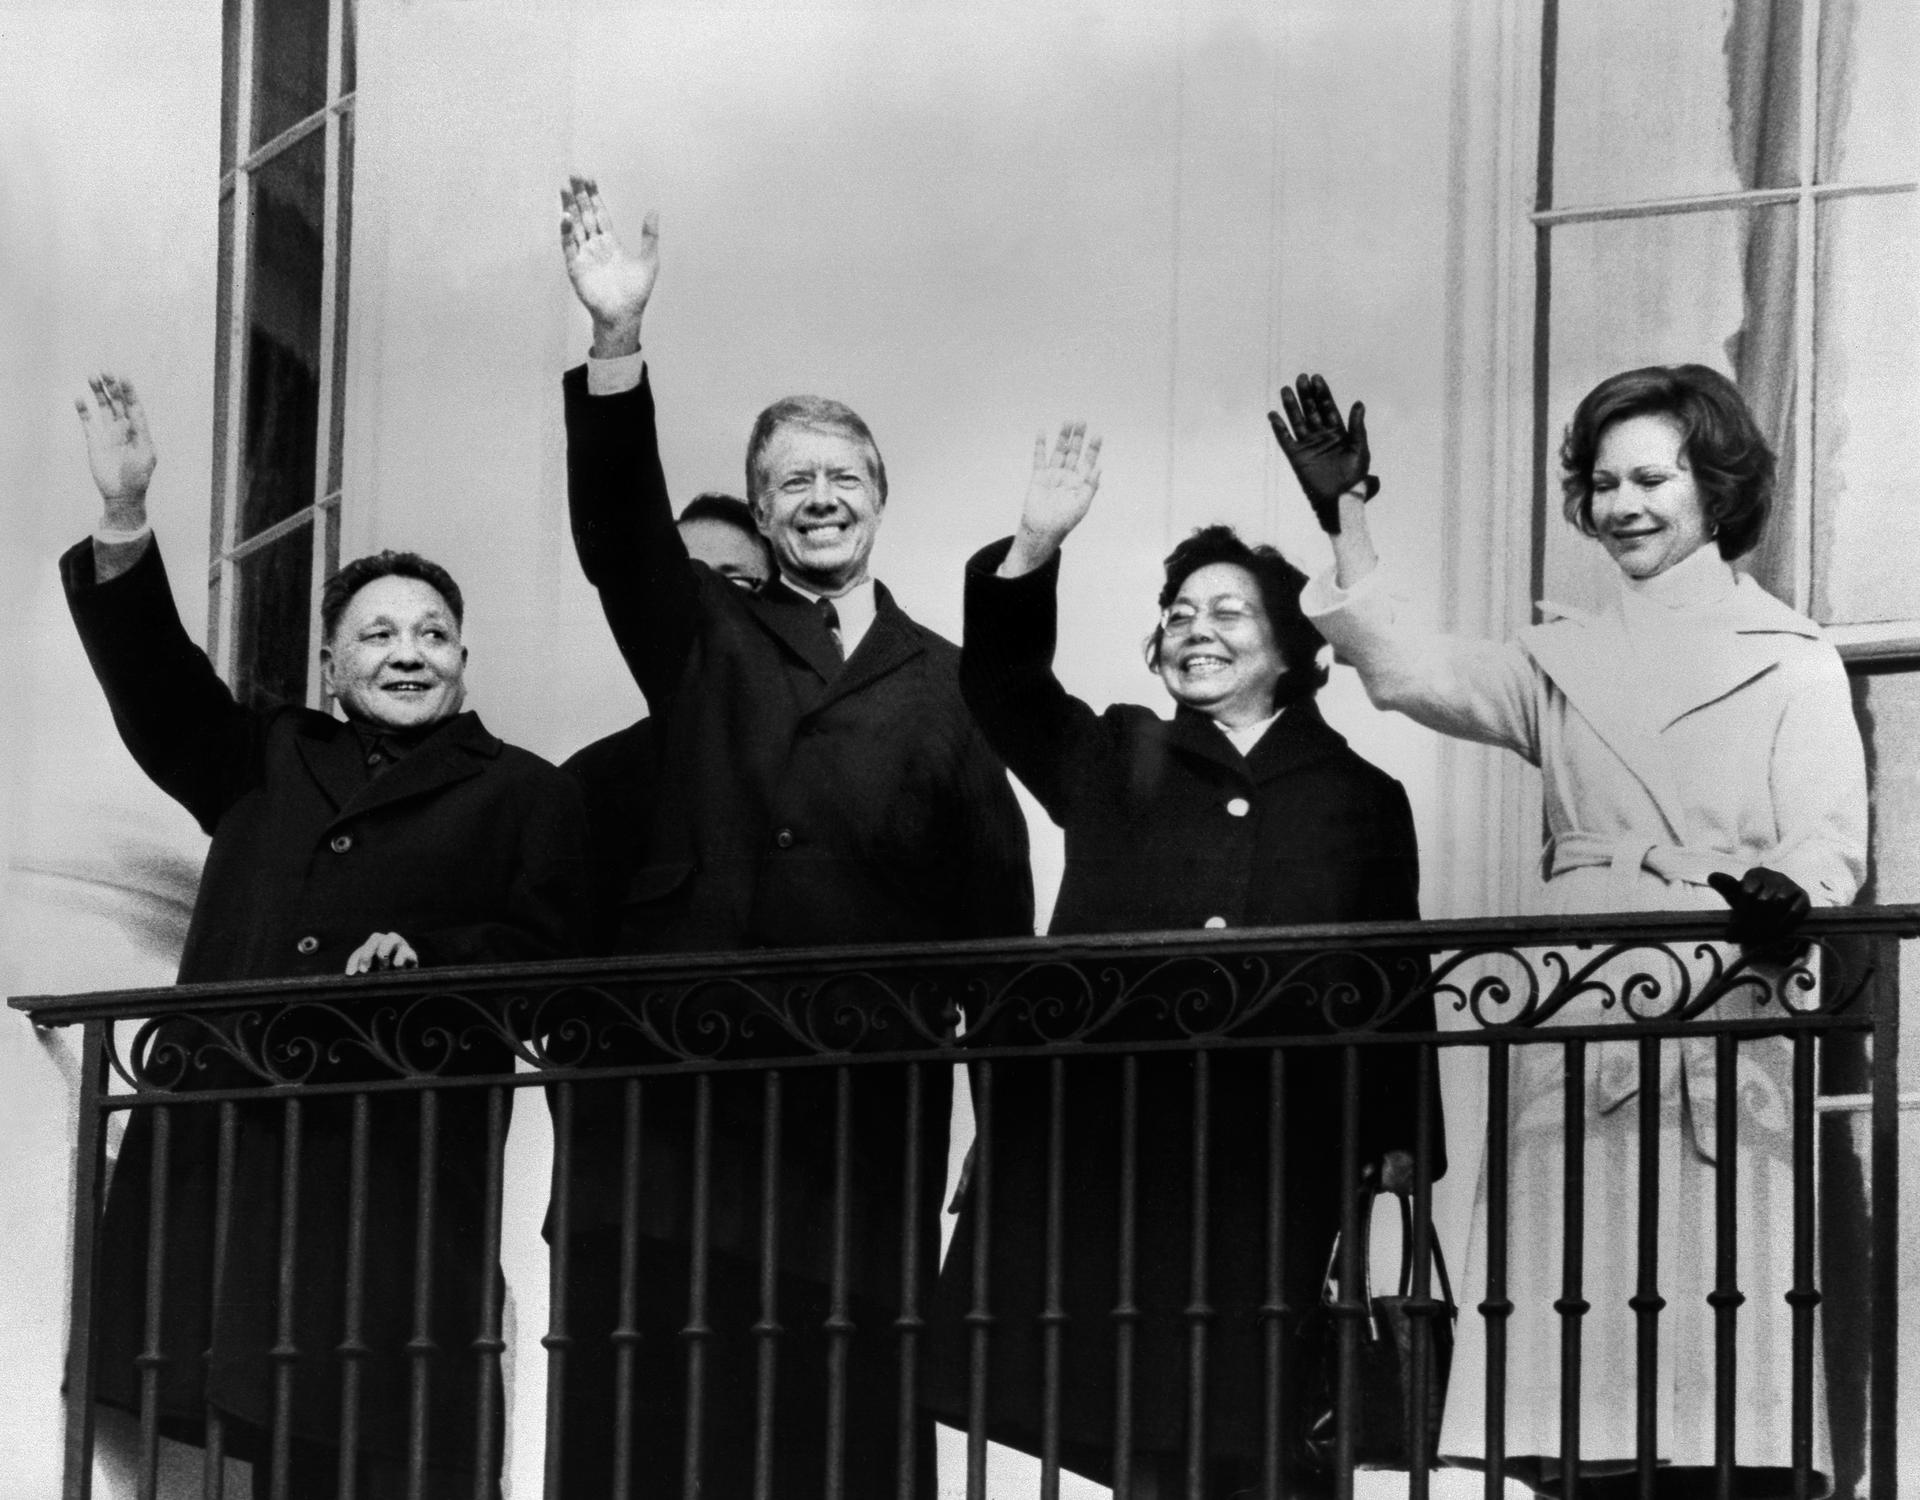 Deng Xiaoping and US president Jimmy Carter, with wives Zhuo Lin and Rosalynn Carter, wave from a balcony at the White House in 1979. Photo: AFP